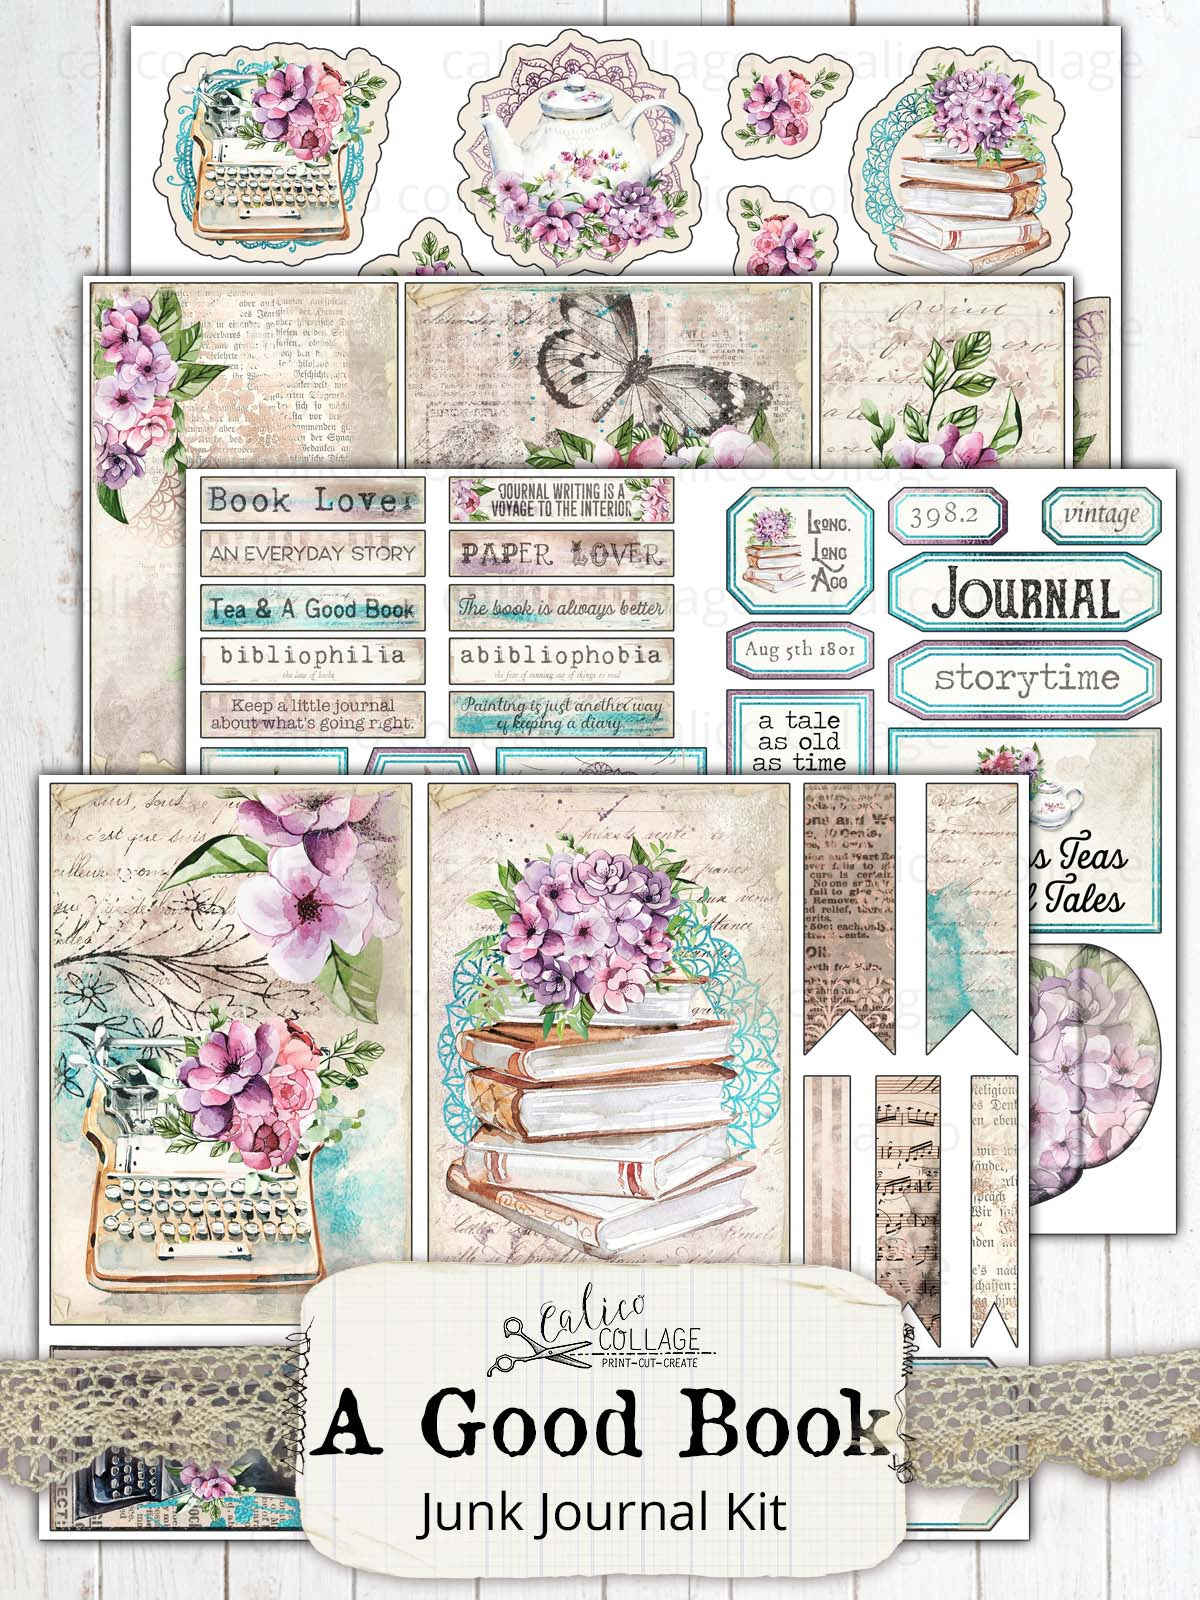 A Good Book Junk Journal Kit, Junk Journal Printable – CalicoCollage